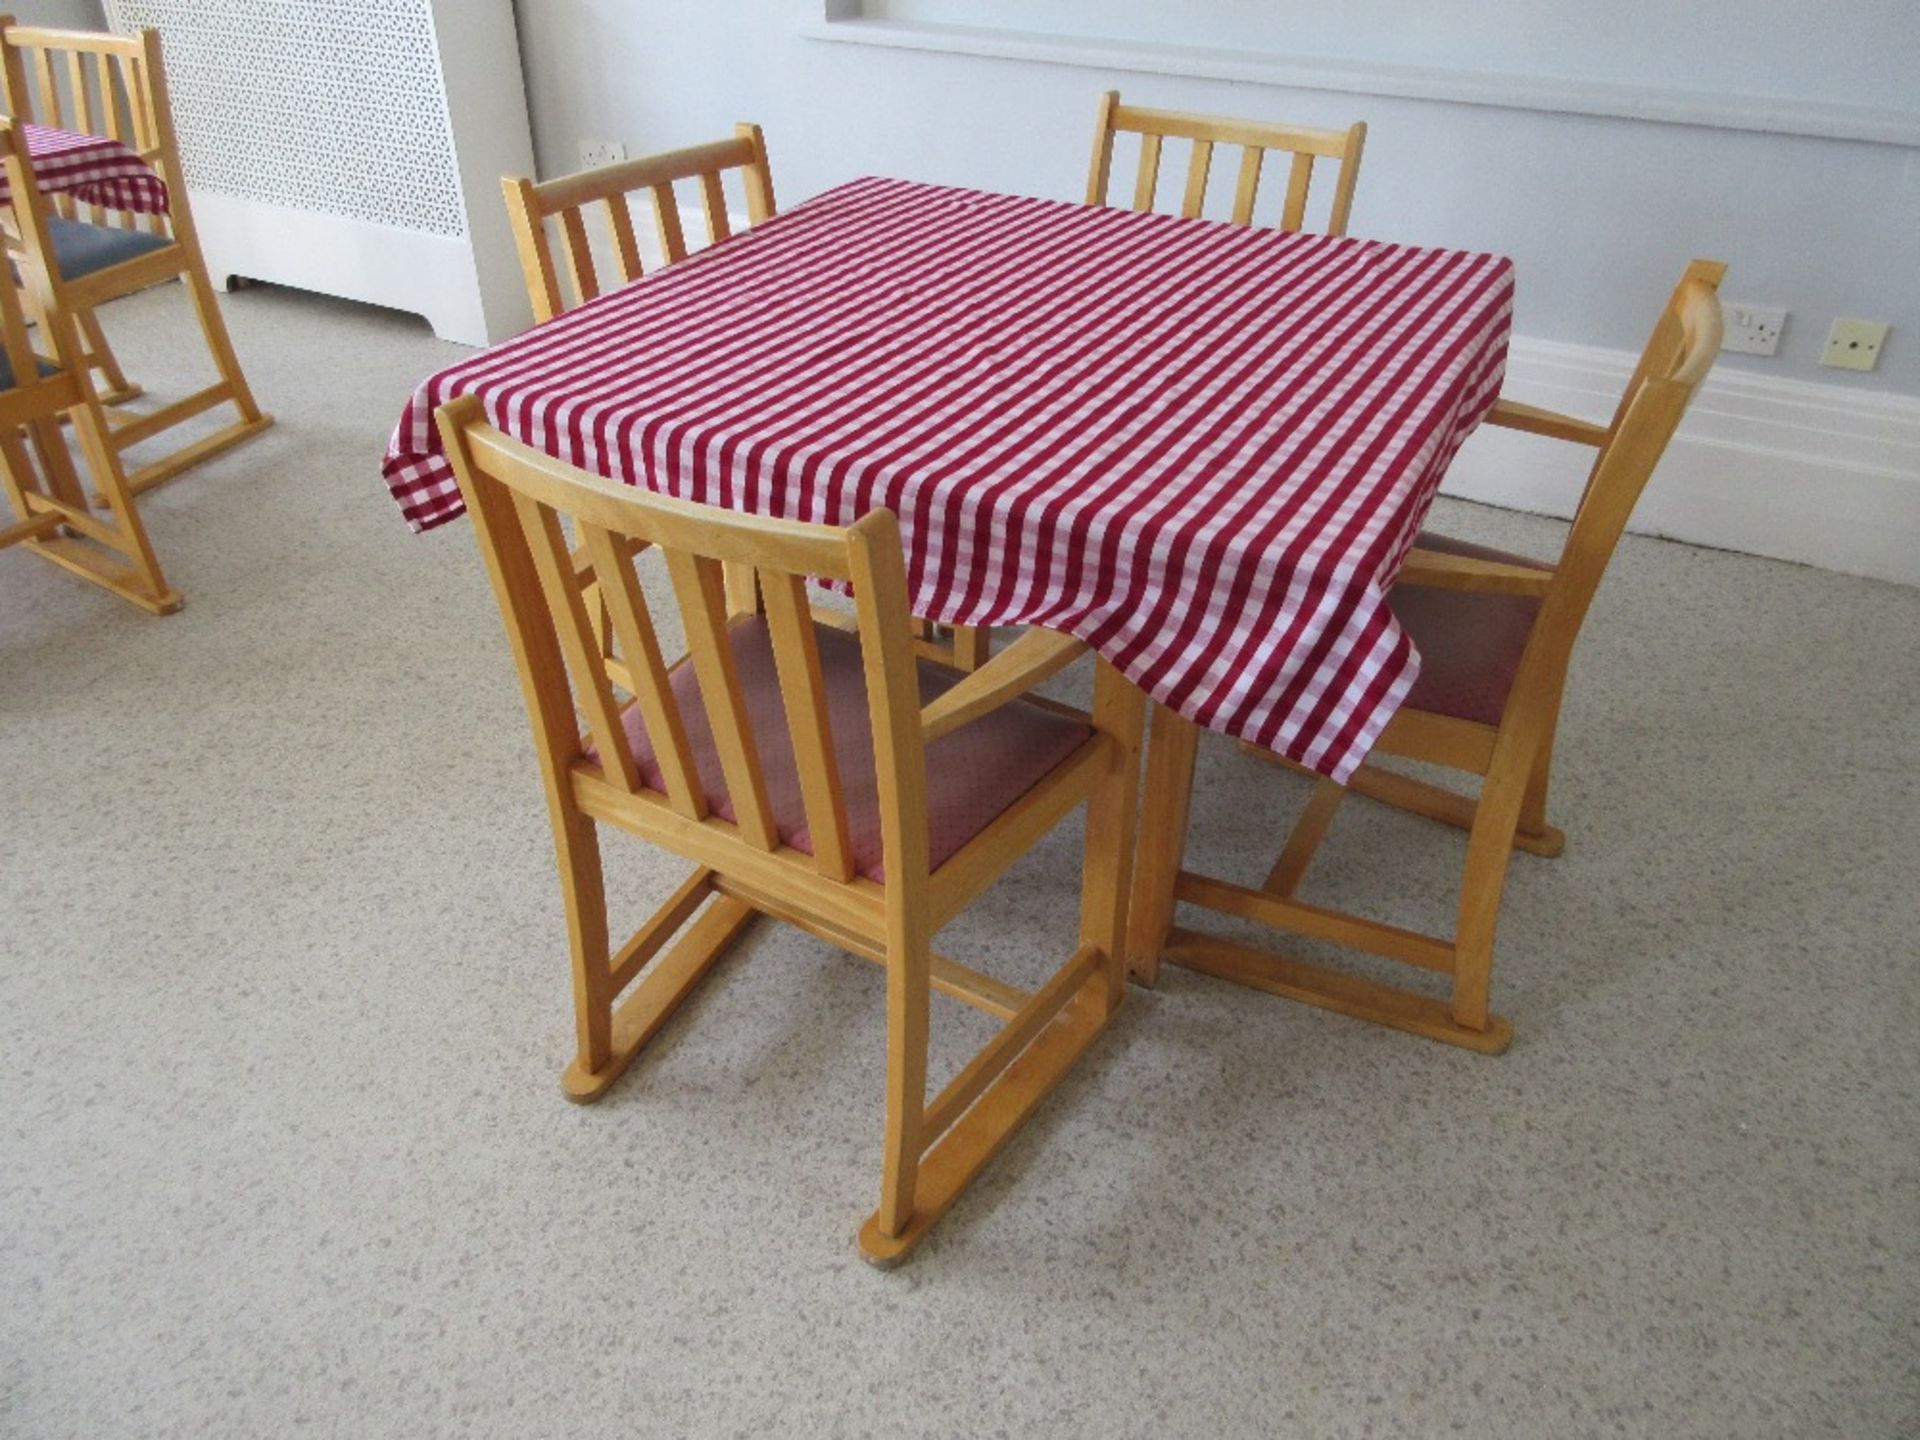 3 - Square wooden tables with 12 chairs